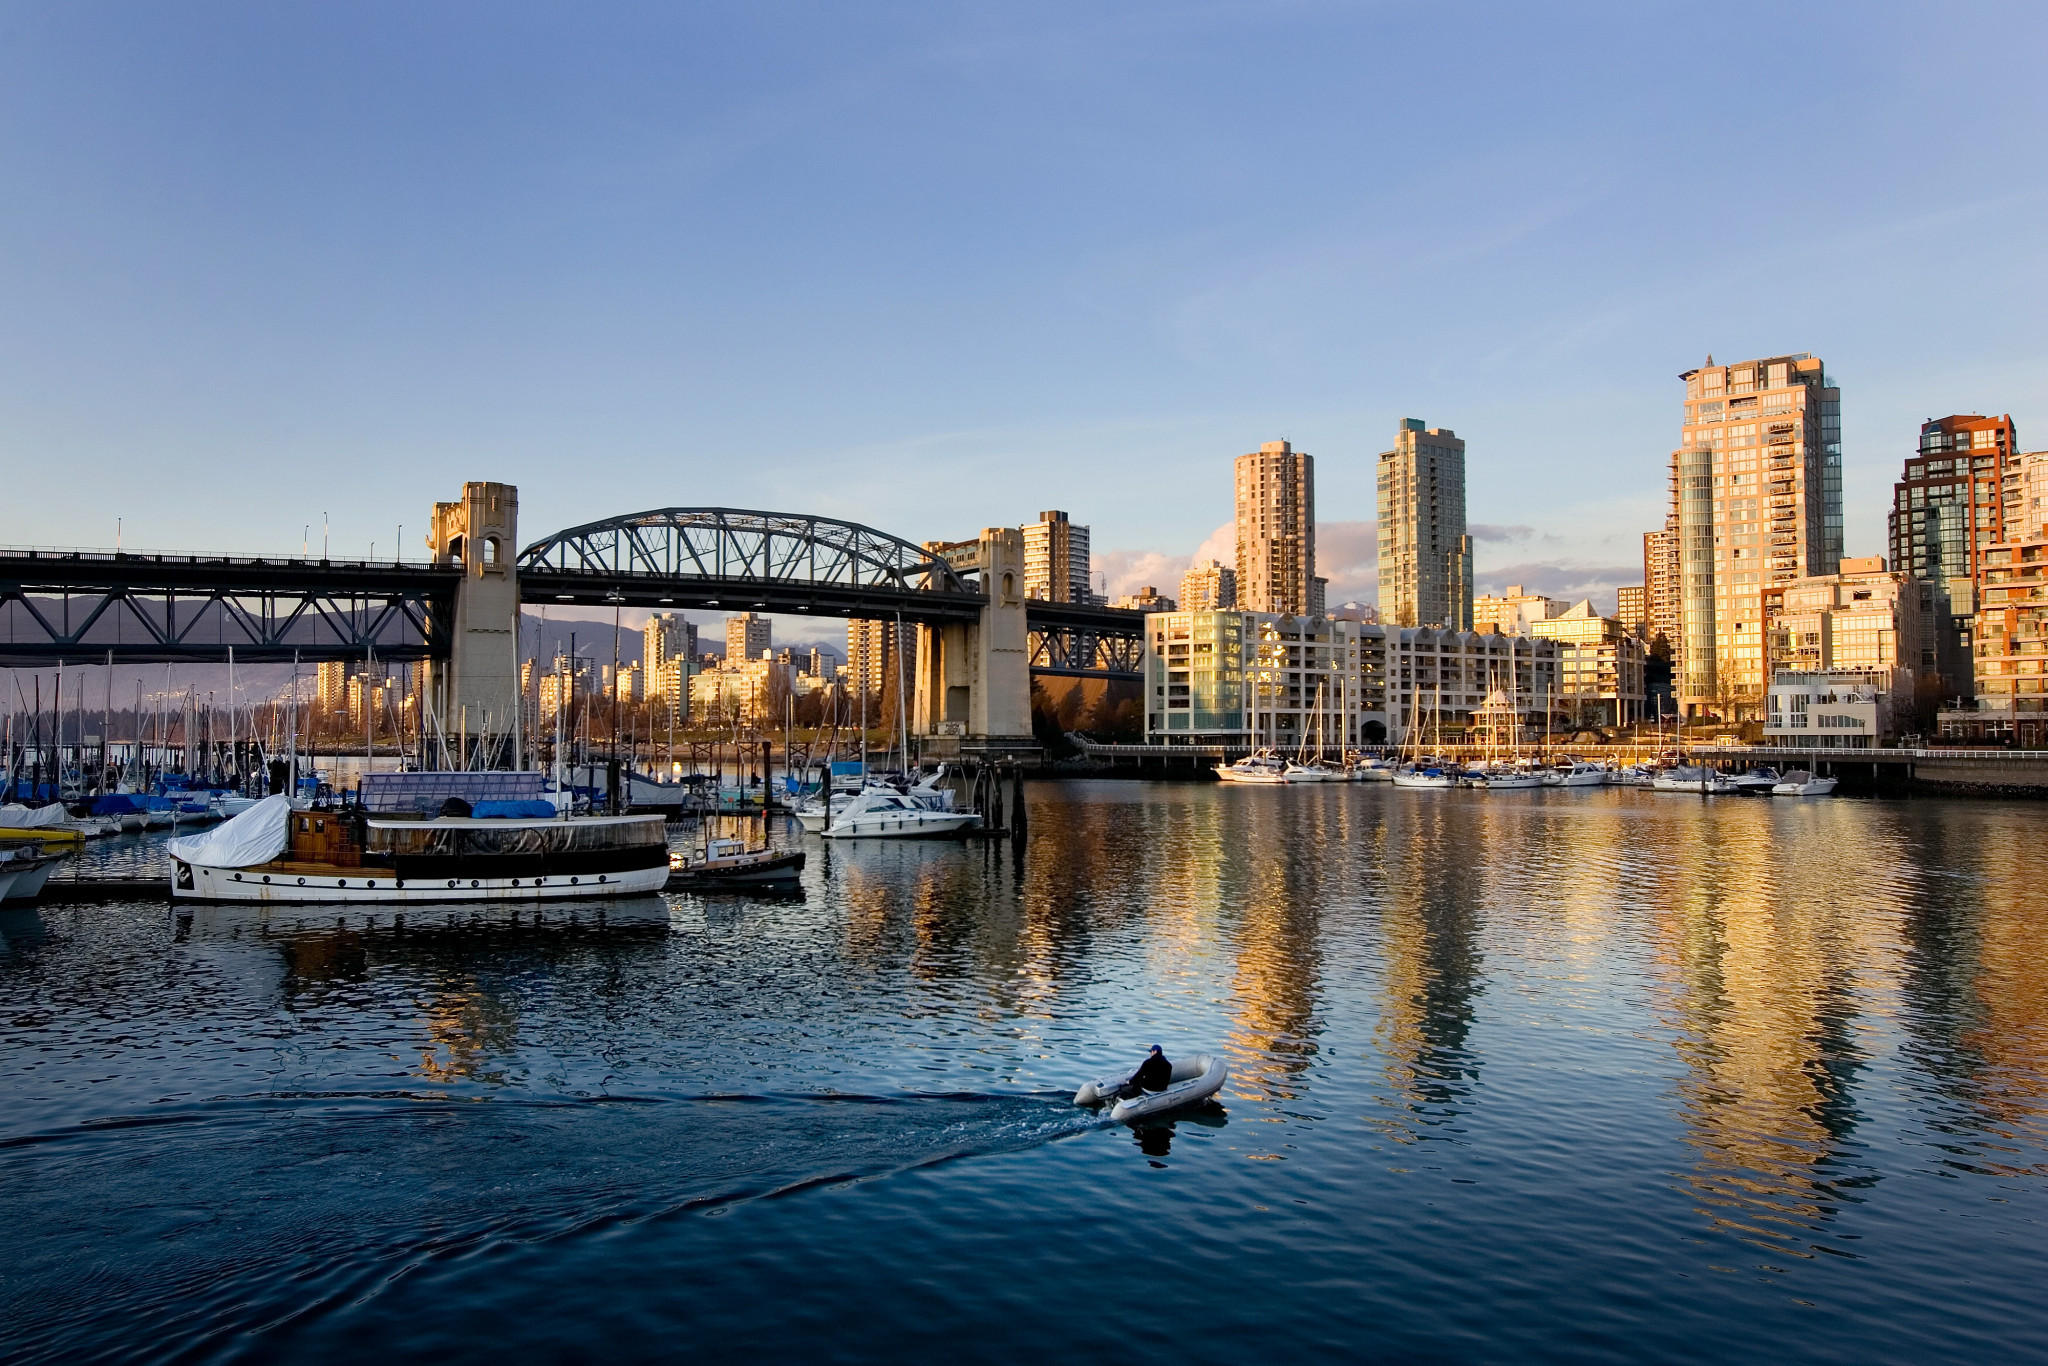 Vancouver City Council is considering bidding for the 2030 Winter Olympics and Paralympics ©Getty Images